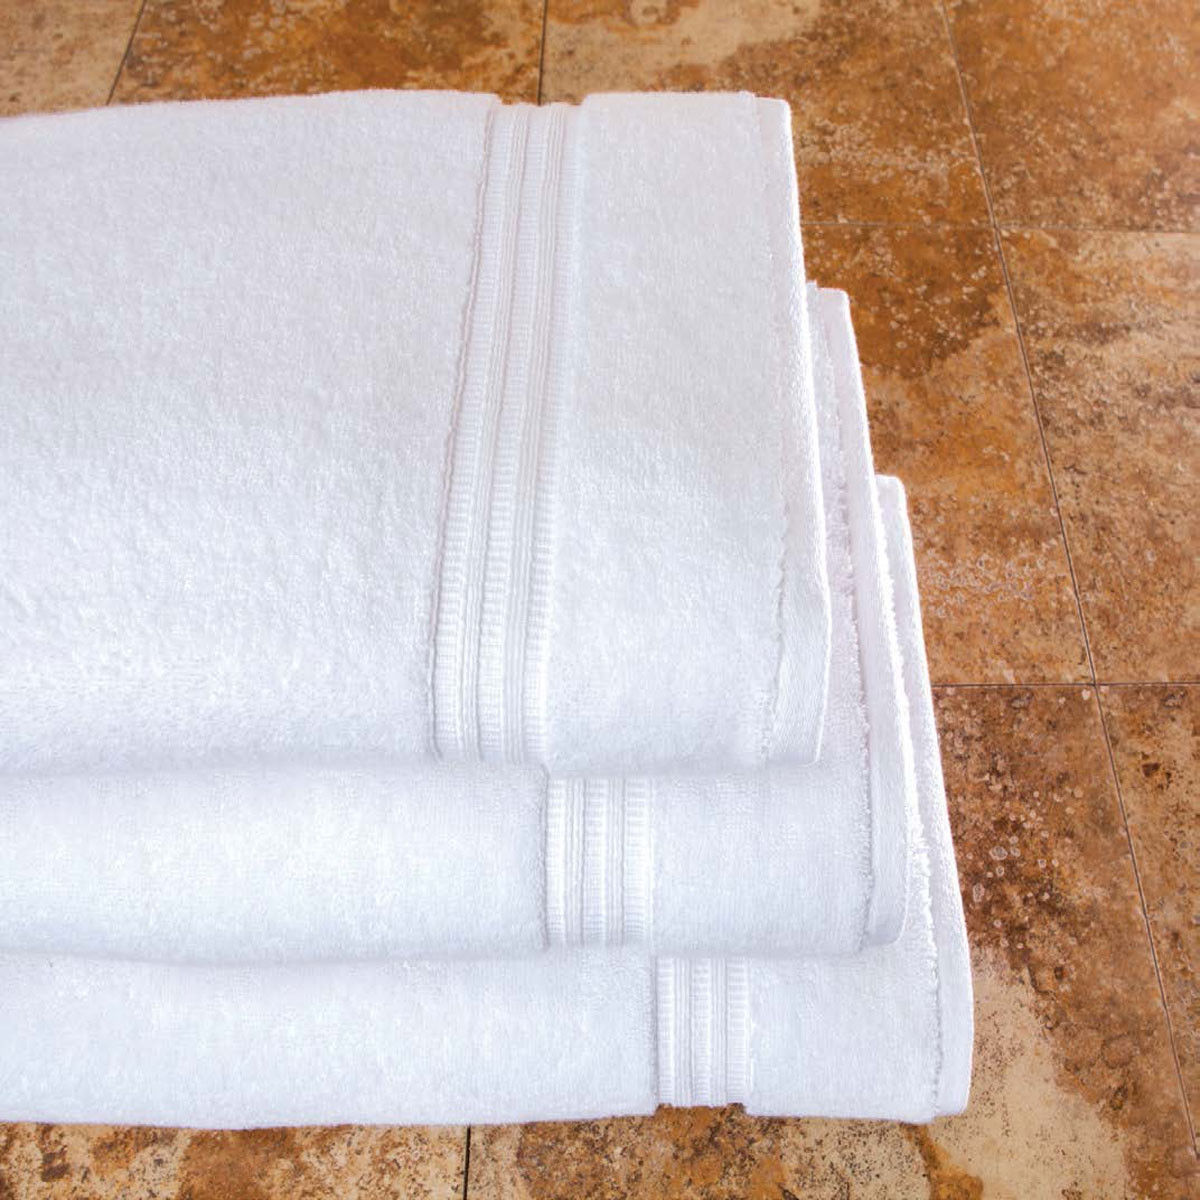 Before buying, how can I feel the softness and texture of the Villa de Lucca towels?